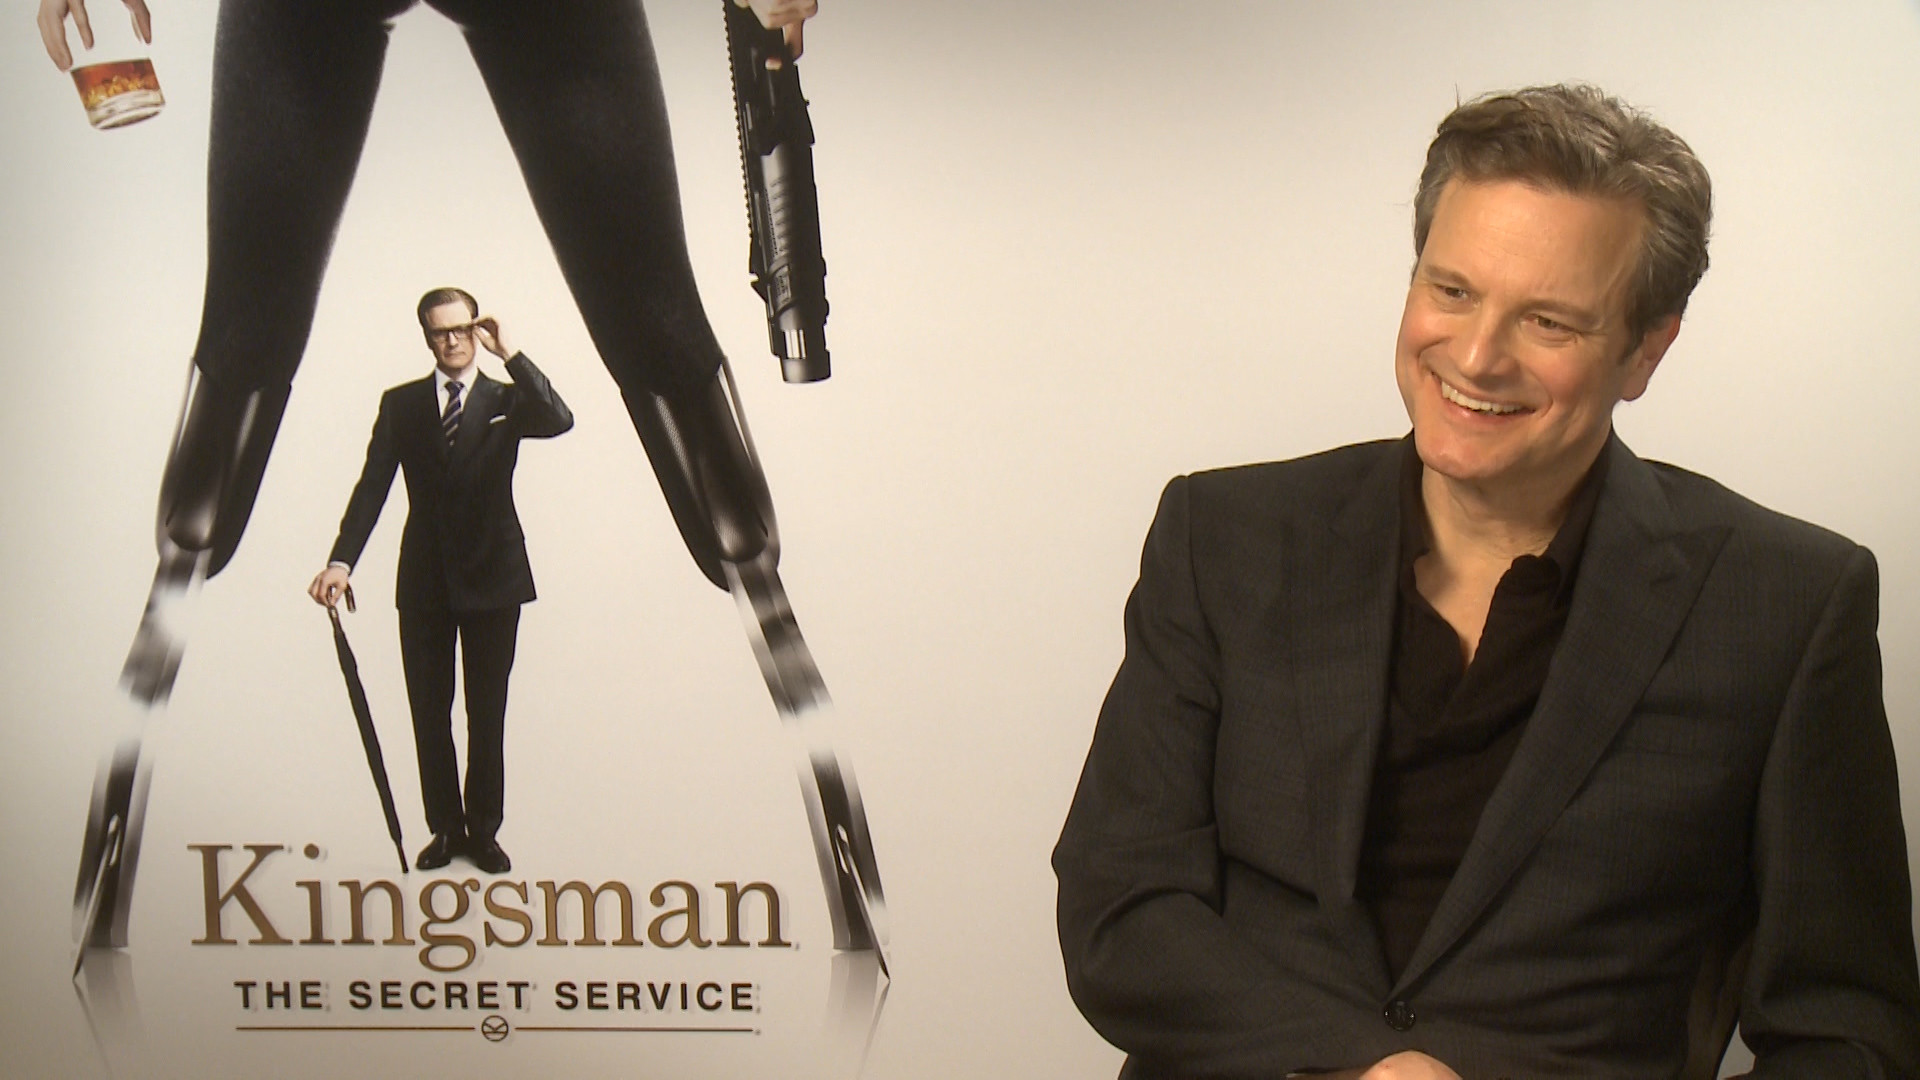 1920x1080 The HeyUGuys Interview: Colin Firth discusses Kingsman: The Secret Service